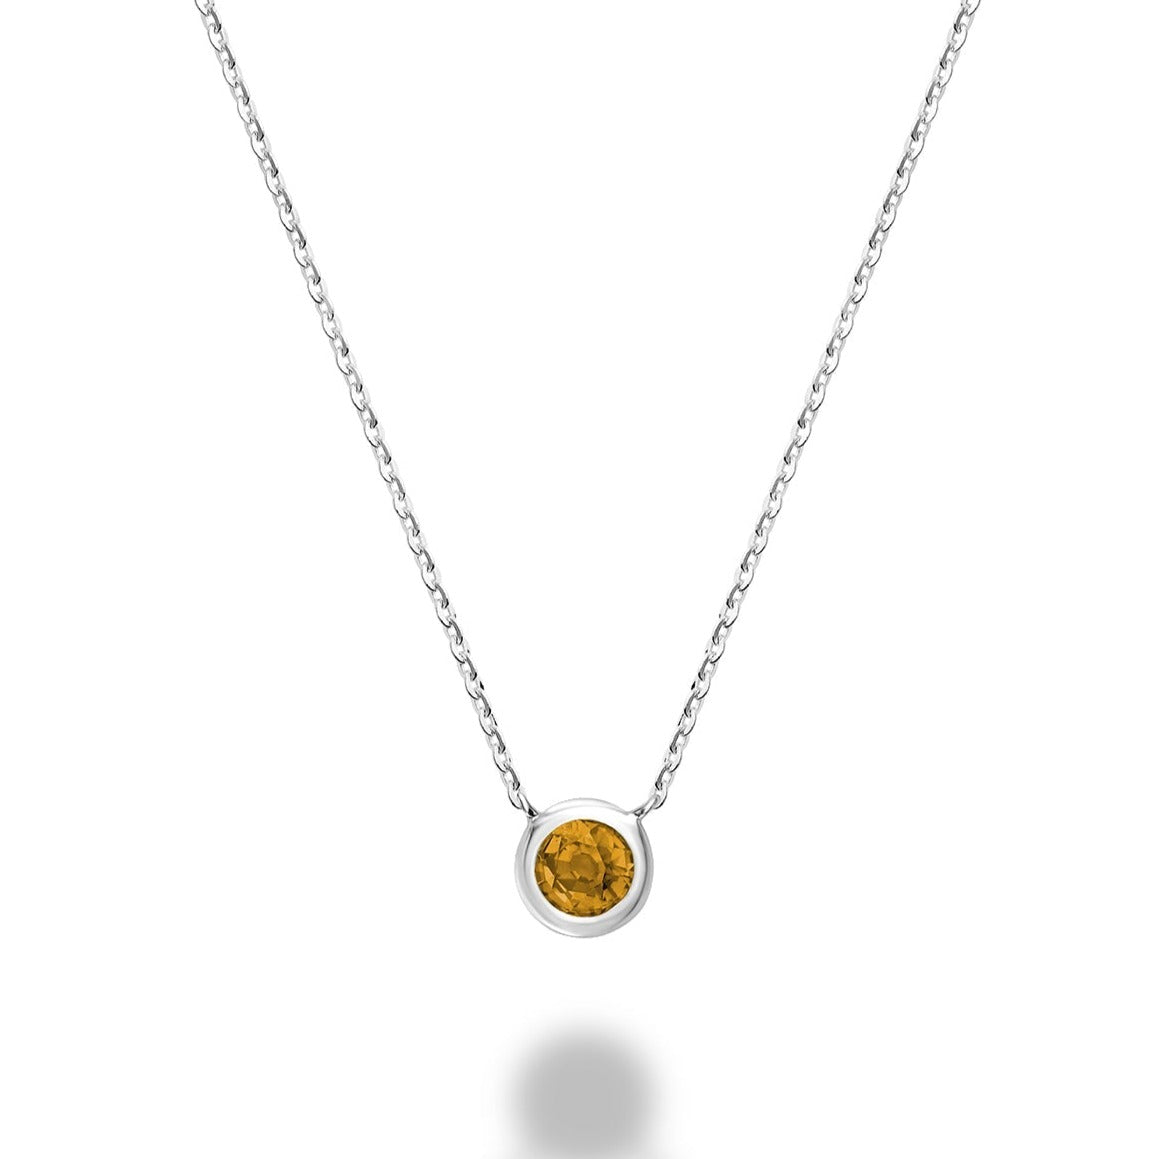 A close-up photo of a citrine necklace in 10kt white gold. The necklace features a bezel-set citrine stone that is a warm golden color. The stone is held securely in place by the gold bezel setting. The chain is also made of 10kt white gold and has an adjustable length.